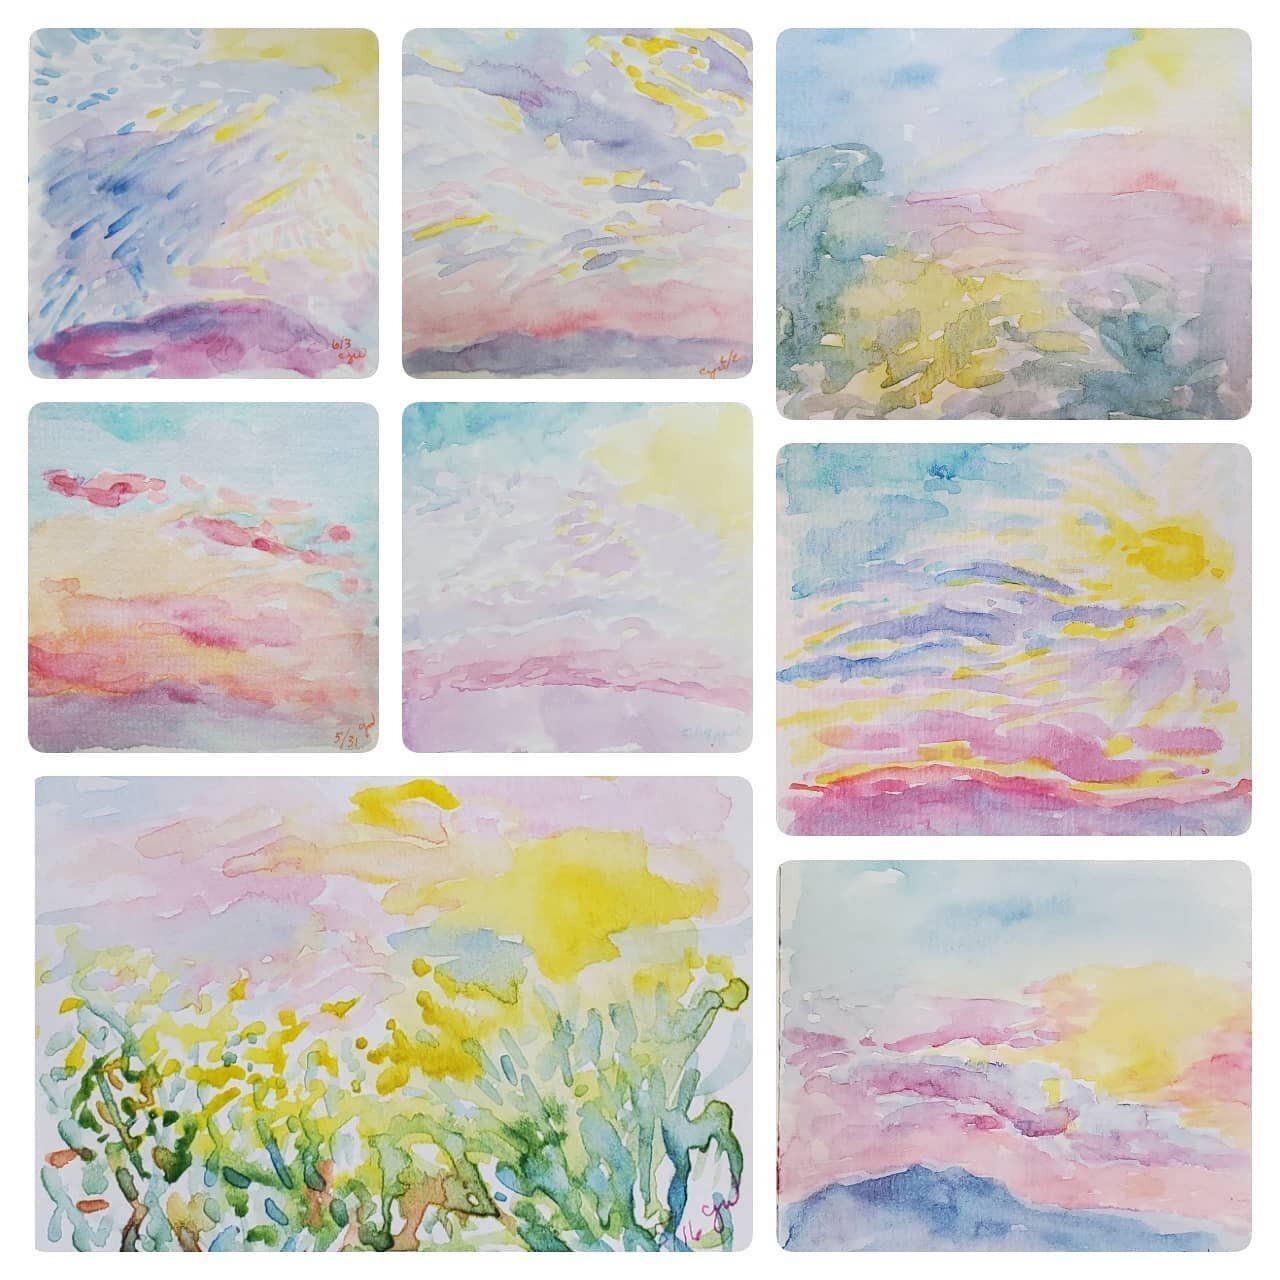 ##morningrhthyms #watercolorsketchbook #morningprayer #morningpages #creativeprocess #seasons #God'screation
....summer mornings....created  a collage of a few of the watercolors the lovely summer mornings have inspired...as in winter and spring...em